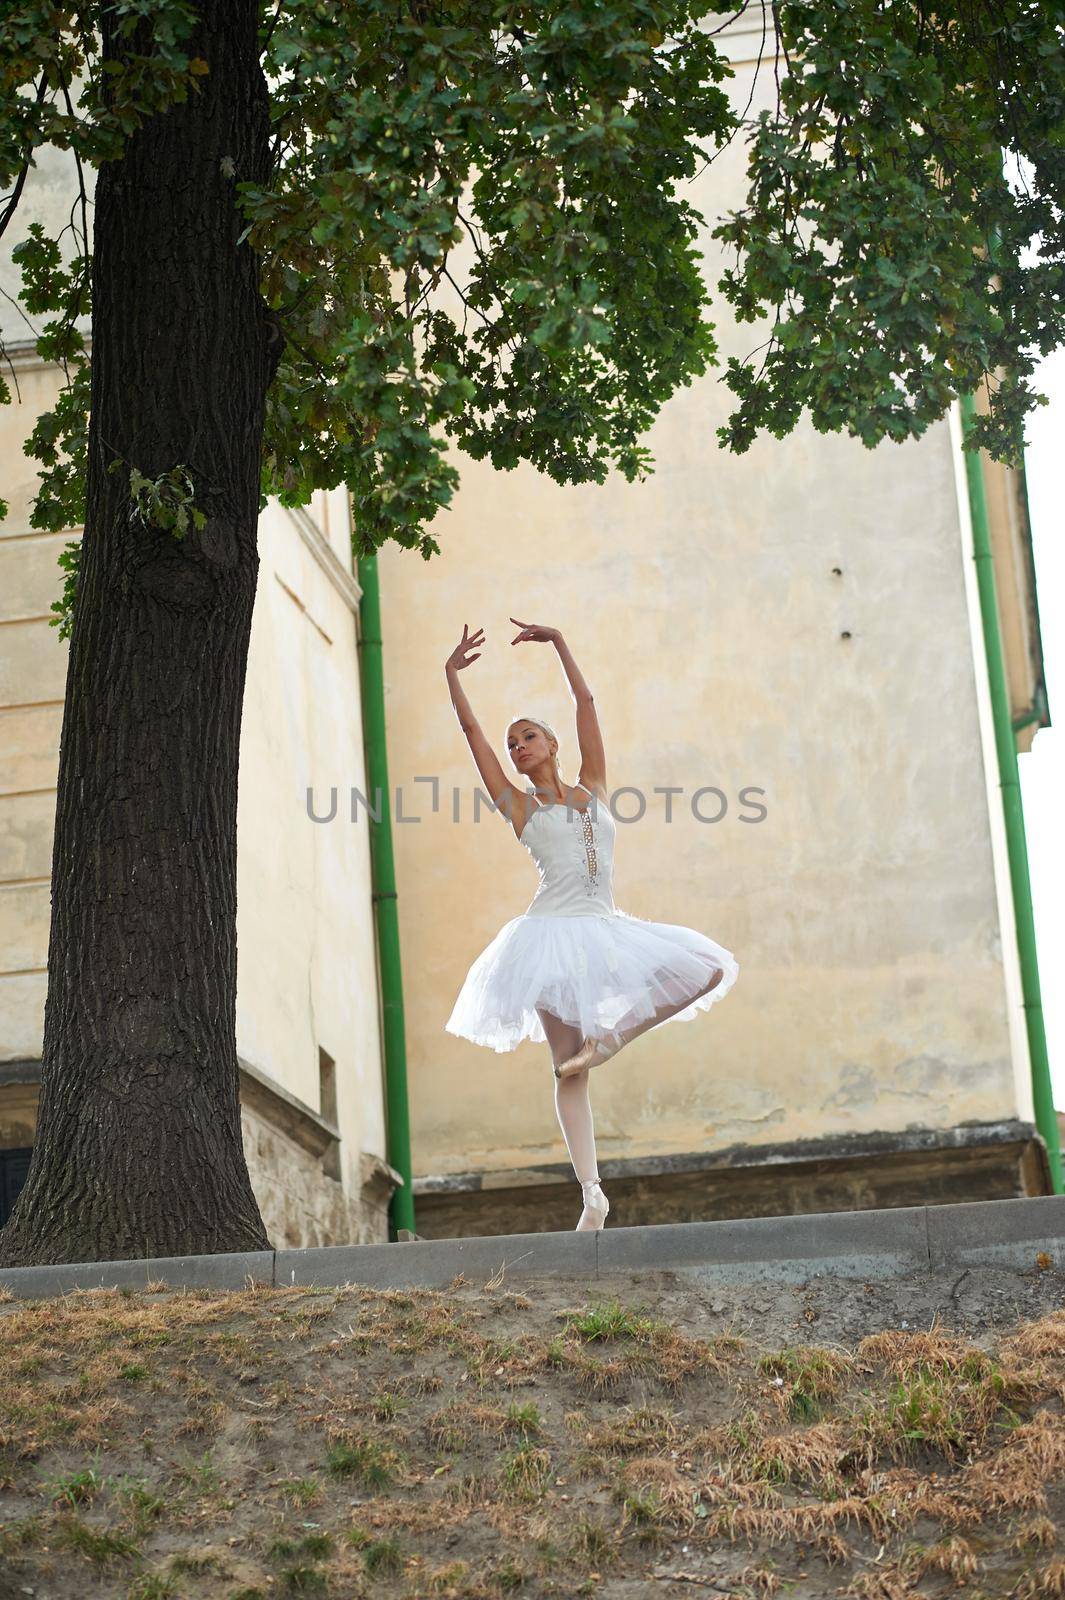 Gorgeous ballerina in white dancing outfit balancing gracefully while performing outdoors.